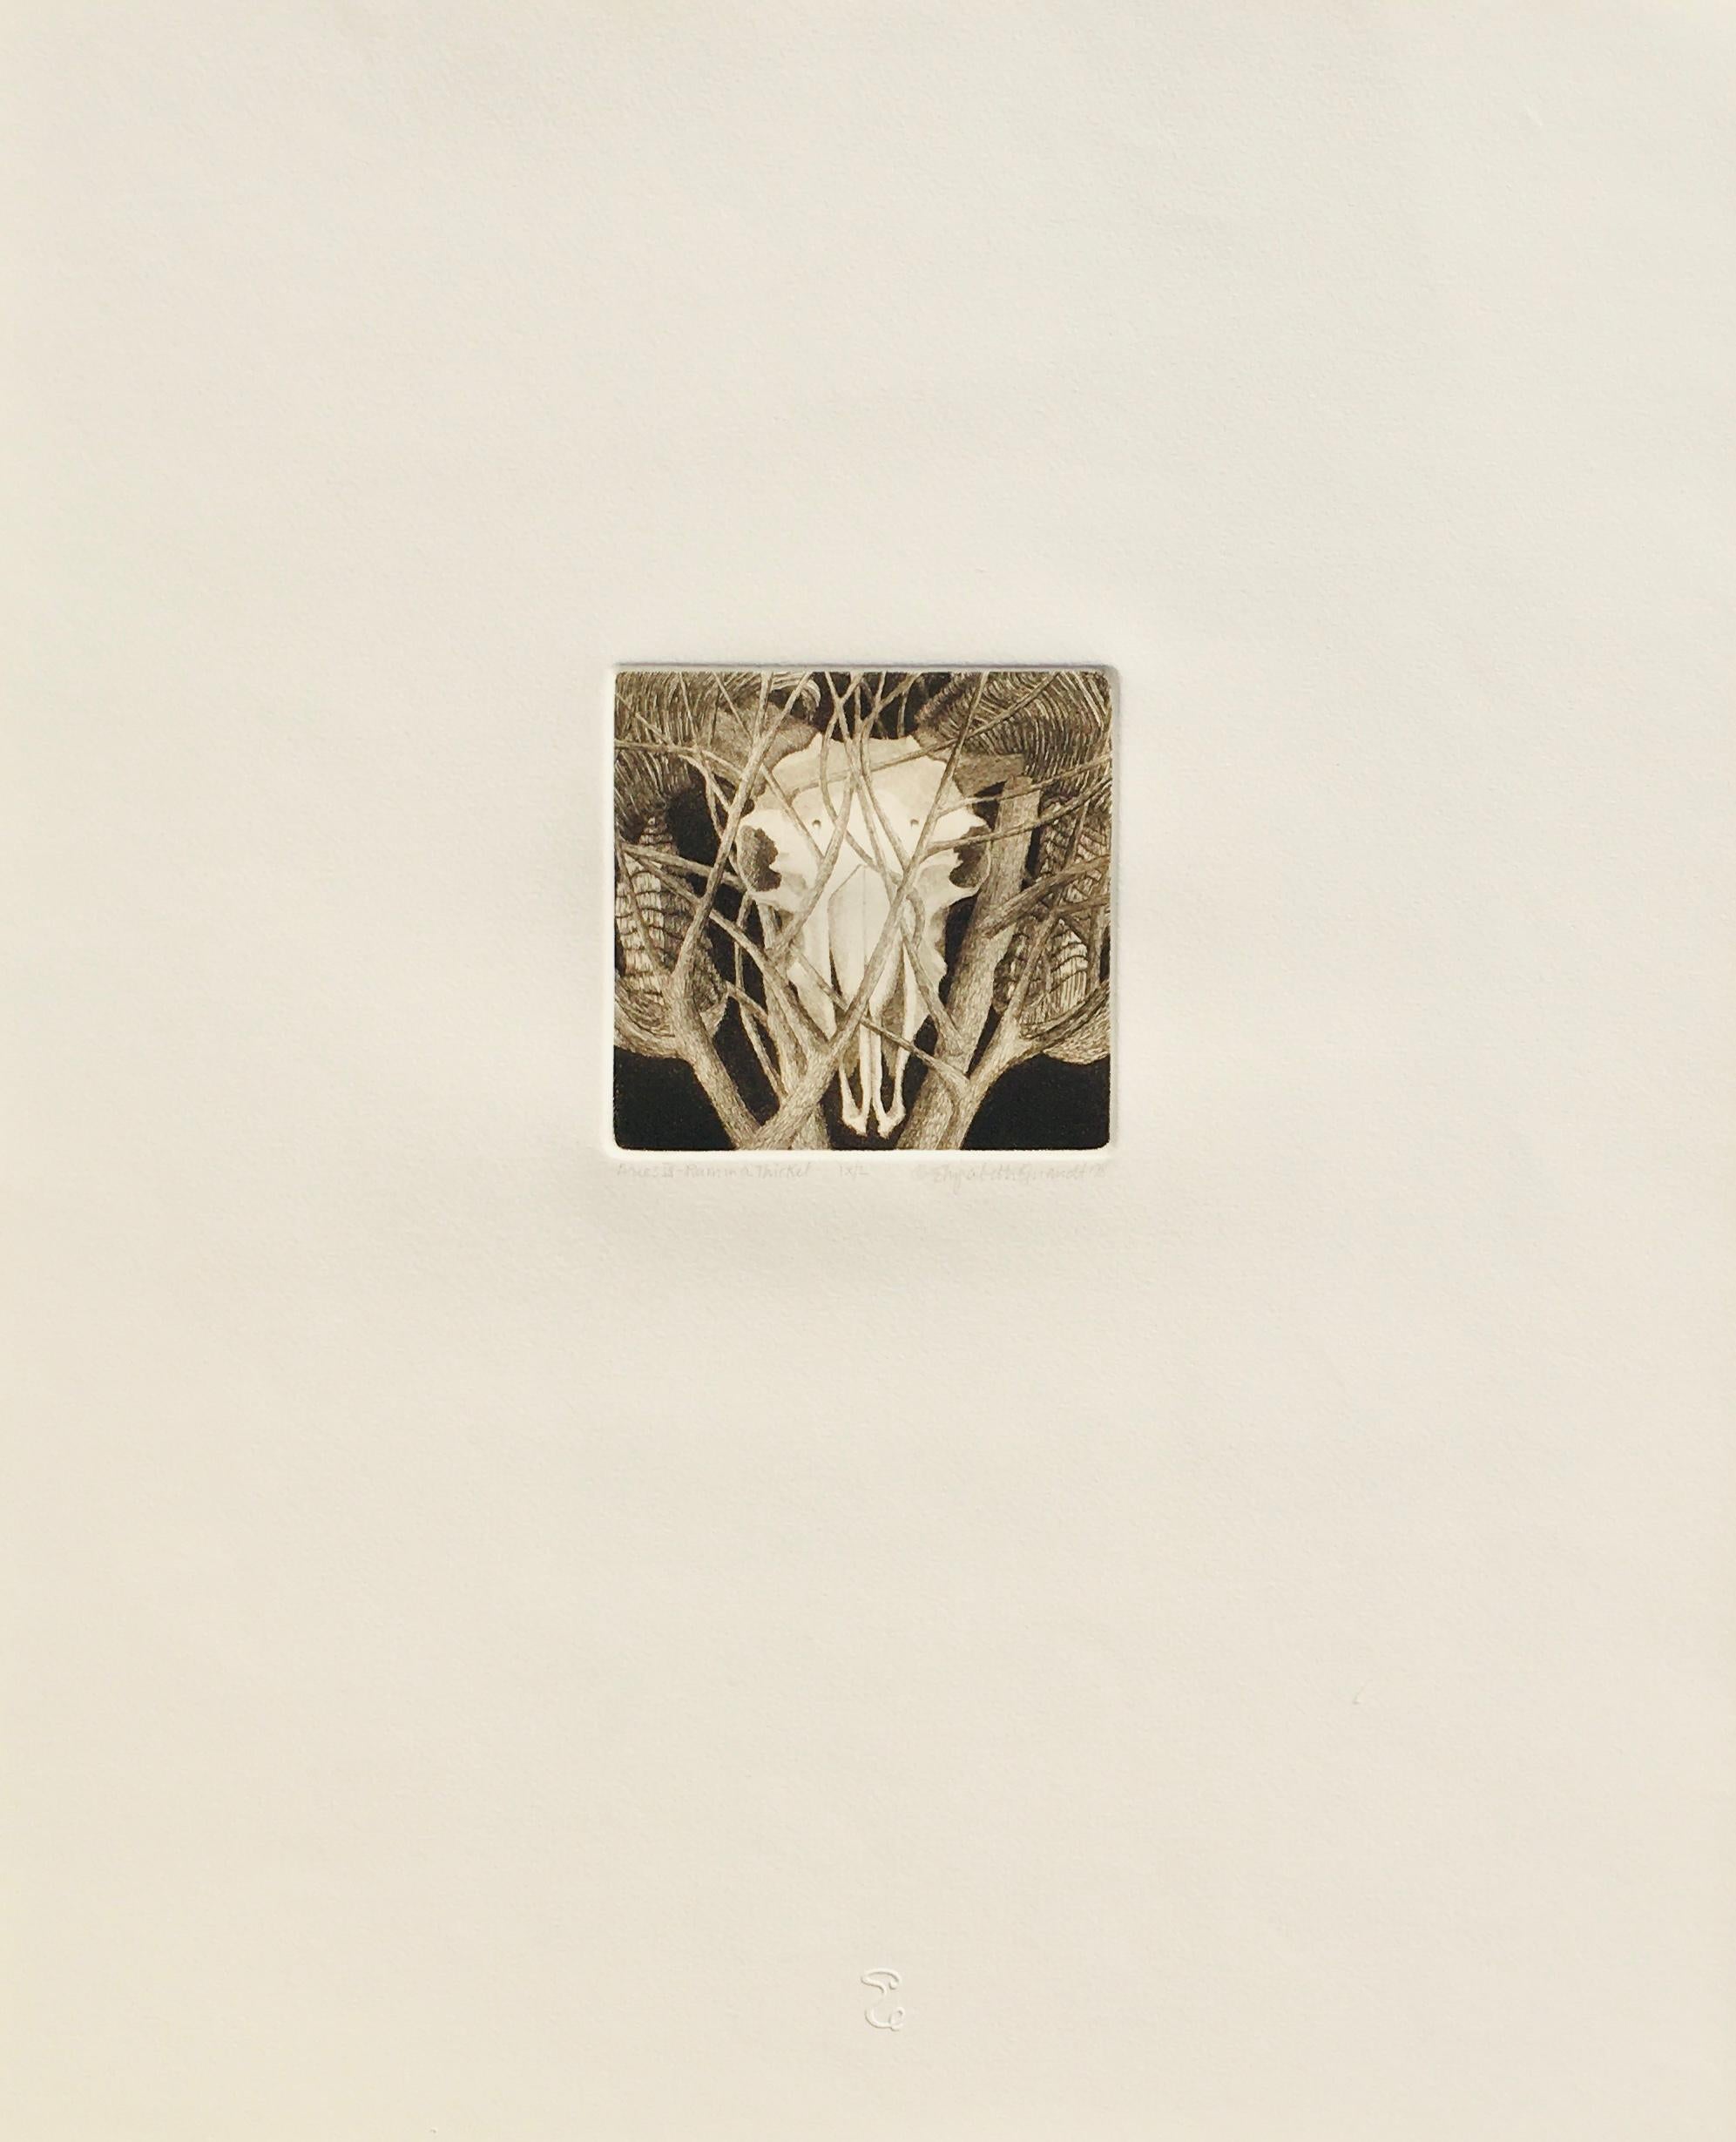 Elizabeth Quandt 'Aries IV' Limited Edition, Signed Etching of Ram's Head For Sale 2